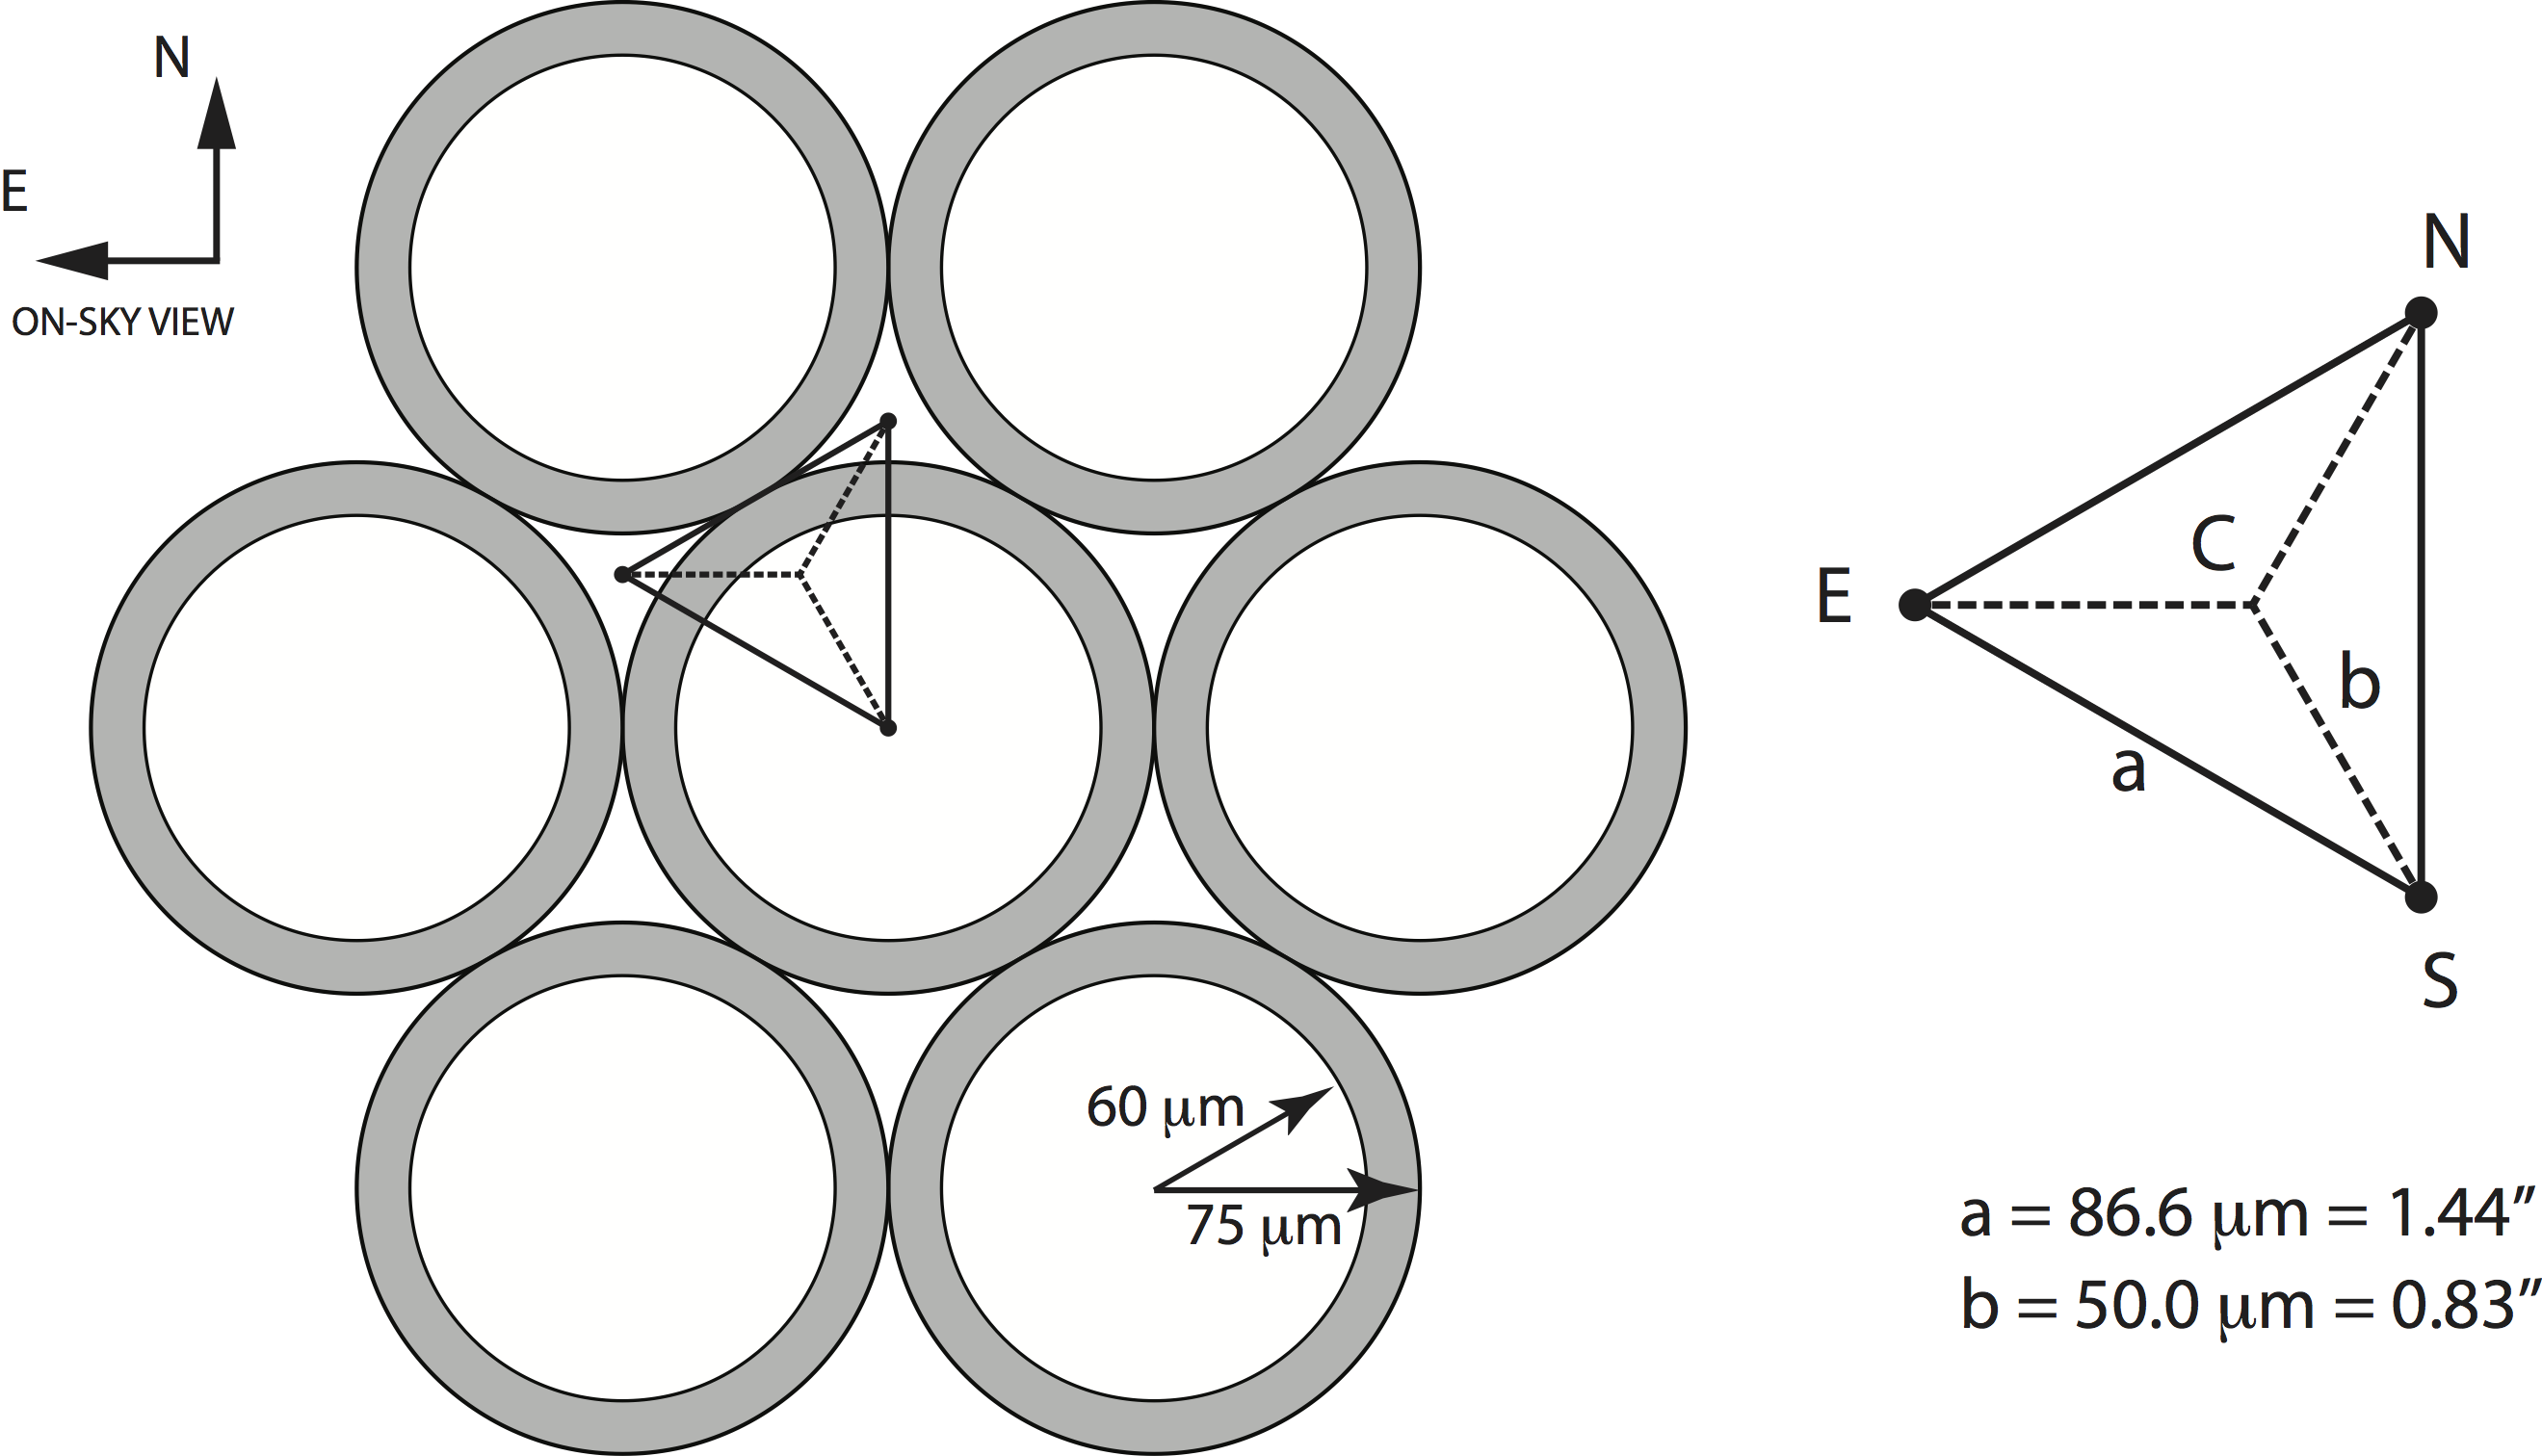 Schematic diagram of the 7 central fibers within a hexagonally packed MaNGA IFU, showing the 120 micron diameter fiber core and surrounding cladding plus buffer. The triangular figure shows the relative positions of the three dither positions; the fiber bundle is located at position “S.” The central (C) “home” position is labeled, along with the north (N), south (S), and east (E) dither positions. The nominal plate scale of the SDSS telescope is 217.7358 mm degree<sup>-1</sup>, or 60.48 microns arcsec<sup>?1</sup>. Figure and caption reproduced from <a href="http://adsabs.harvard.edu/abs/2015AJ....150...19L">Law et al. (2015)</a>.